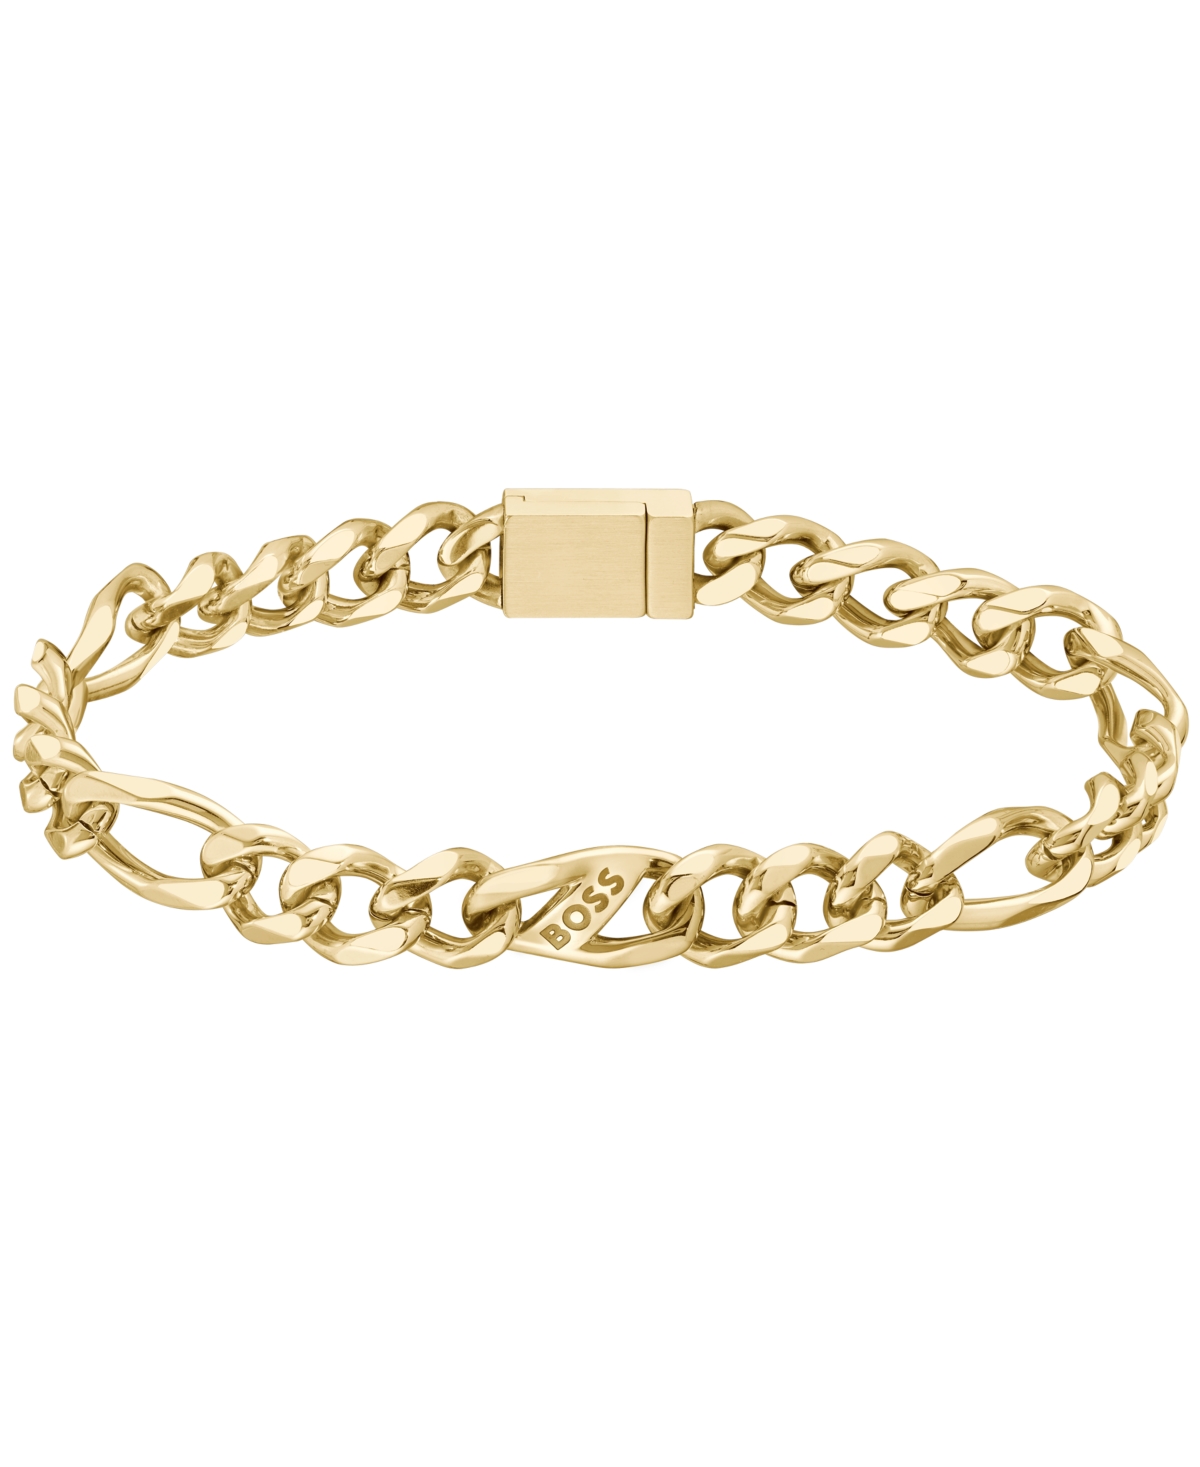 Men's Rian Ionic Plated Thin Gold-Tone Steel Bracelet - Gold